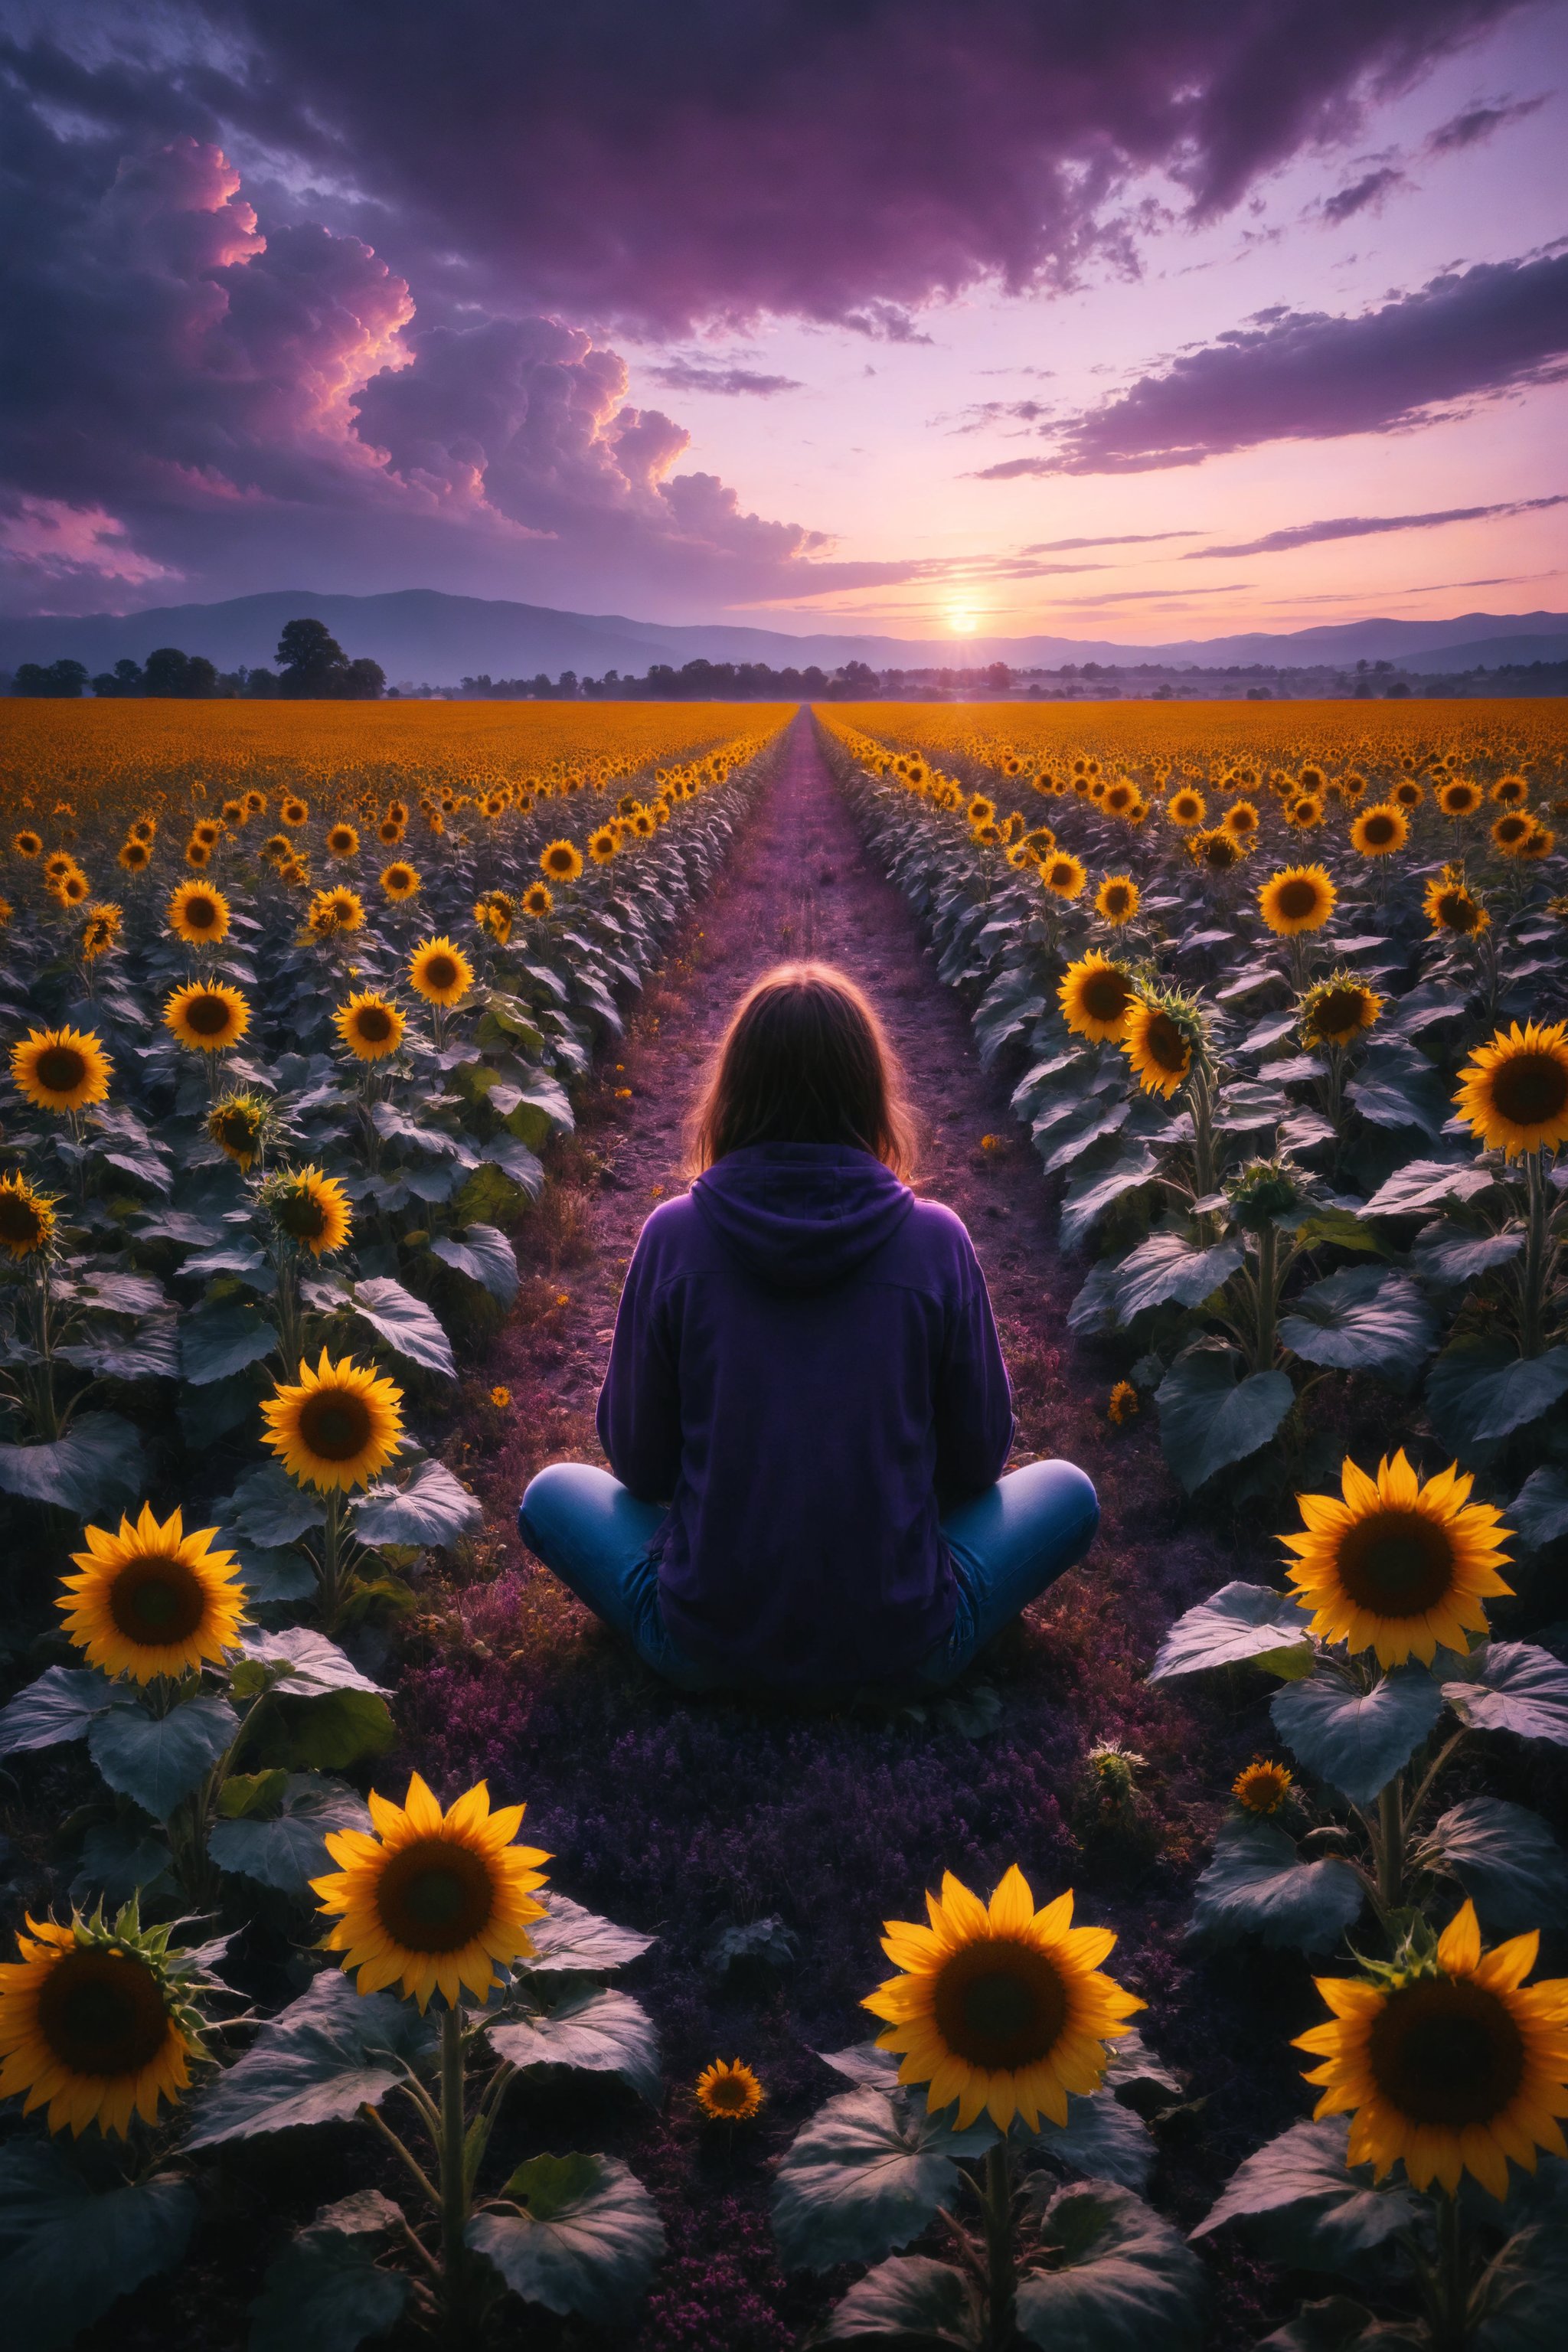 Generate an image of a person sitting in a field of giant sunflowers under a purple dusk sky.